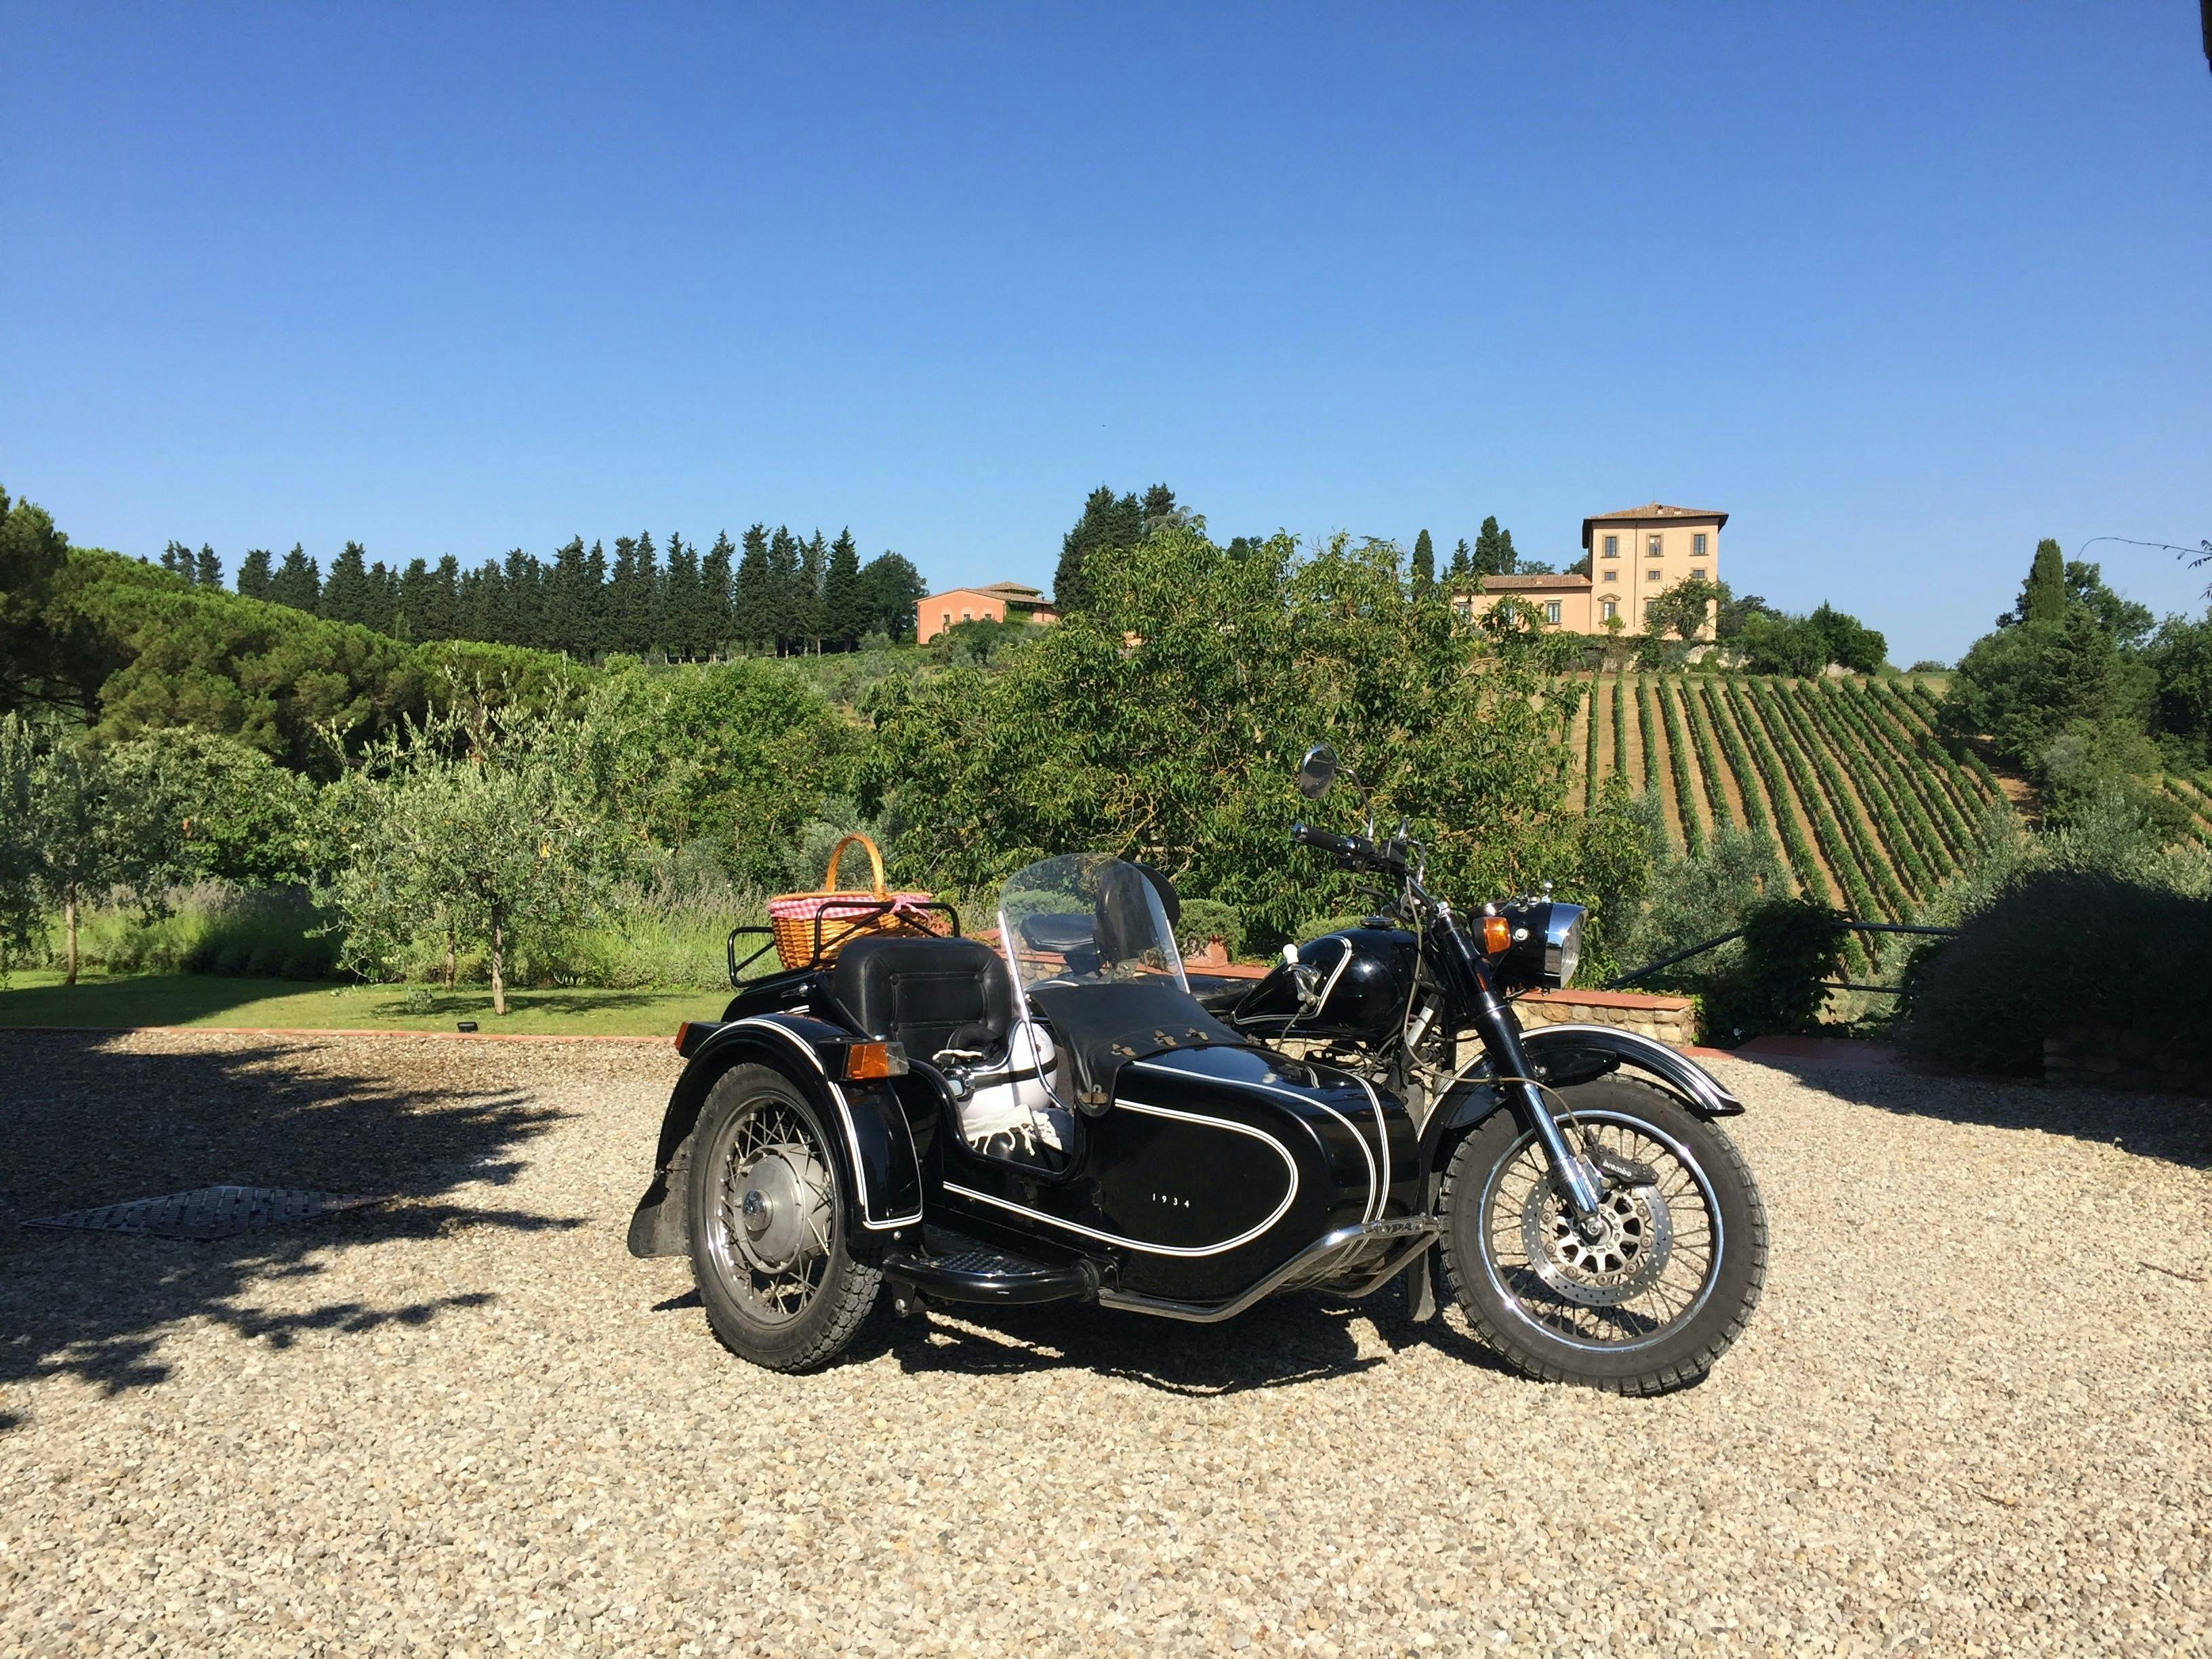 Chianti sidecar tour with wine tasting and lunch